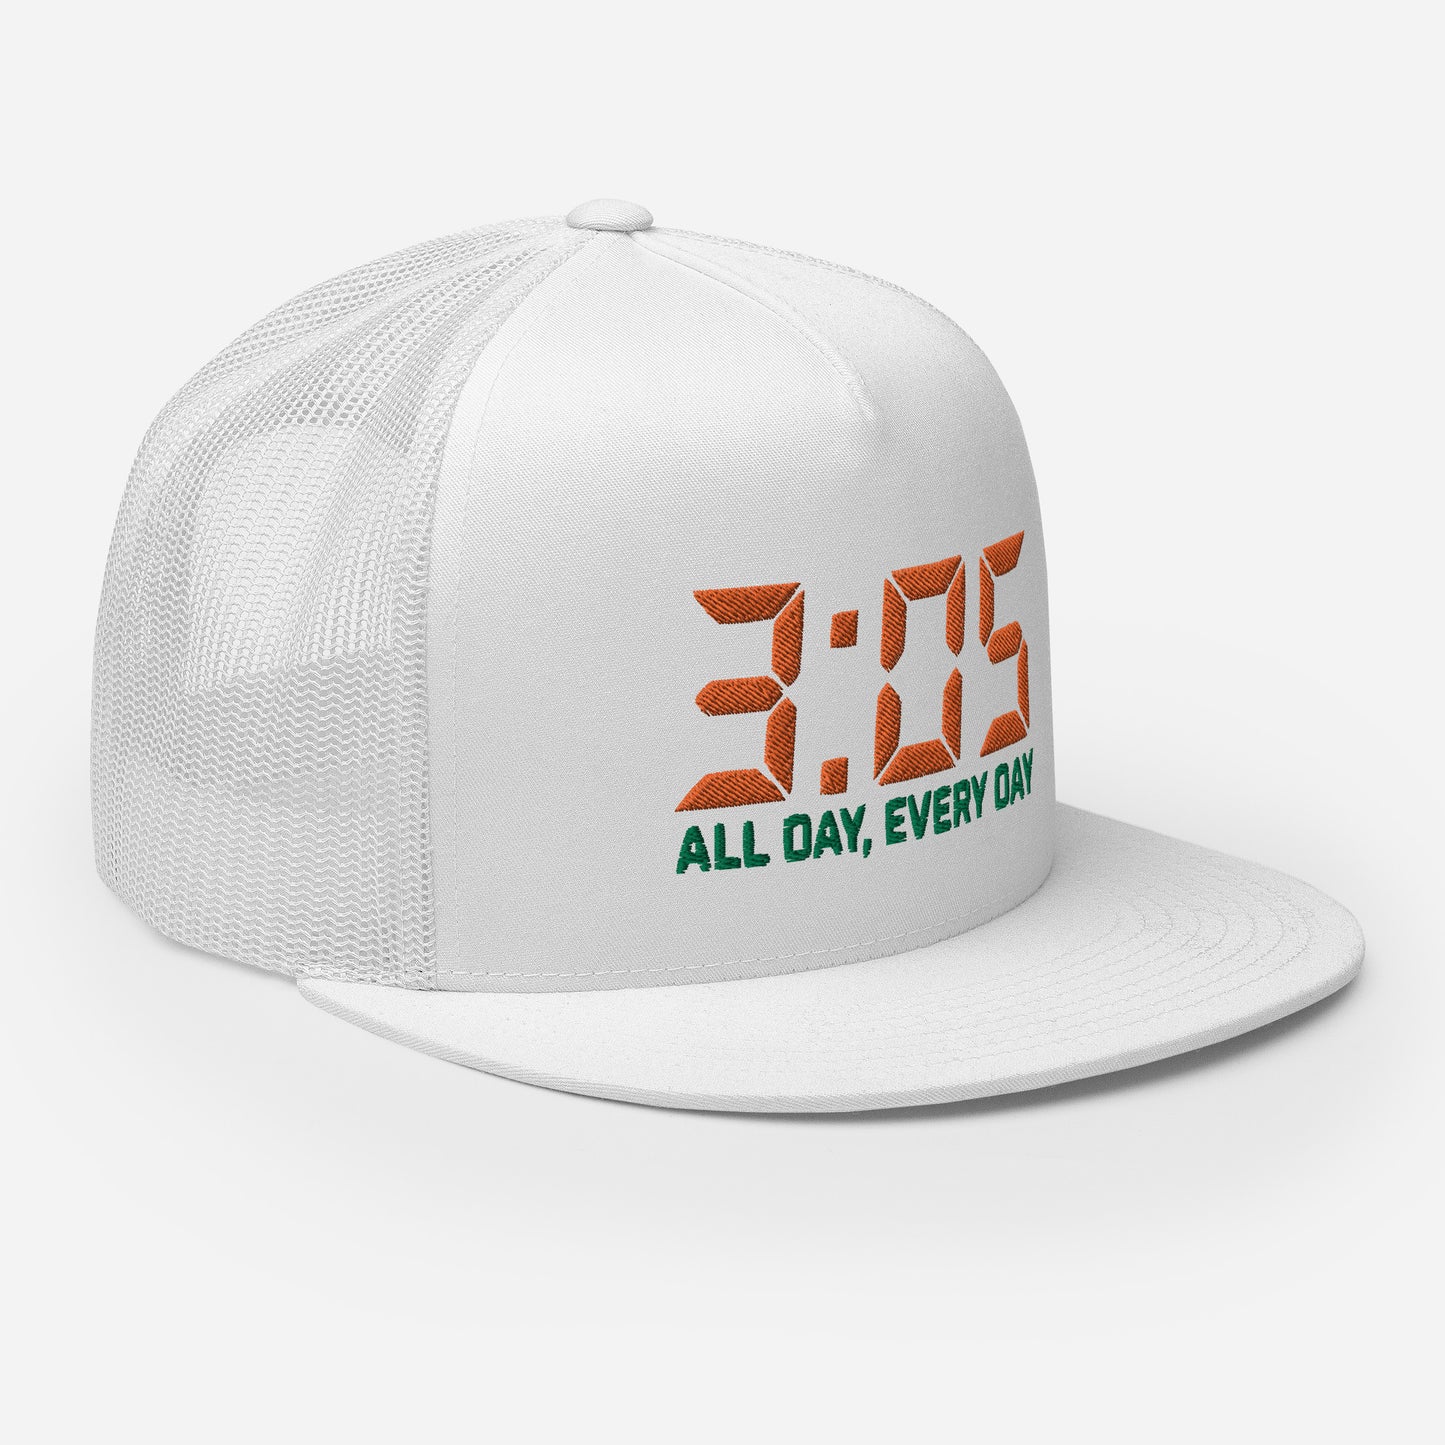 3:05 All Day, Every Day Hat - Designed by Jas